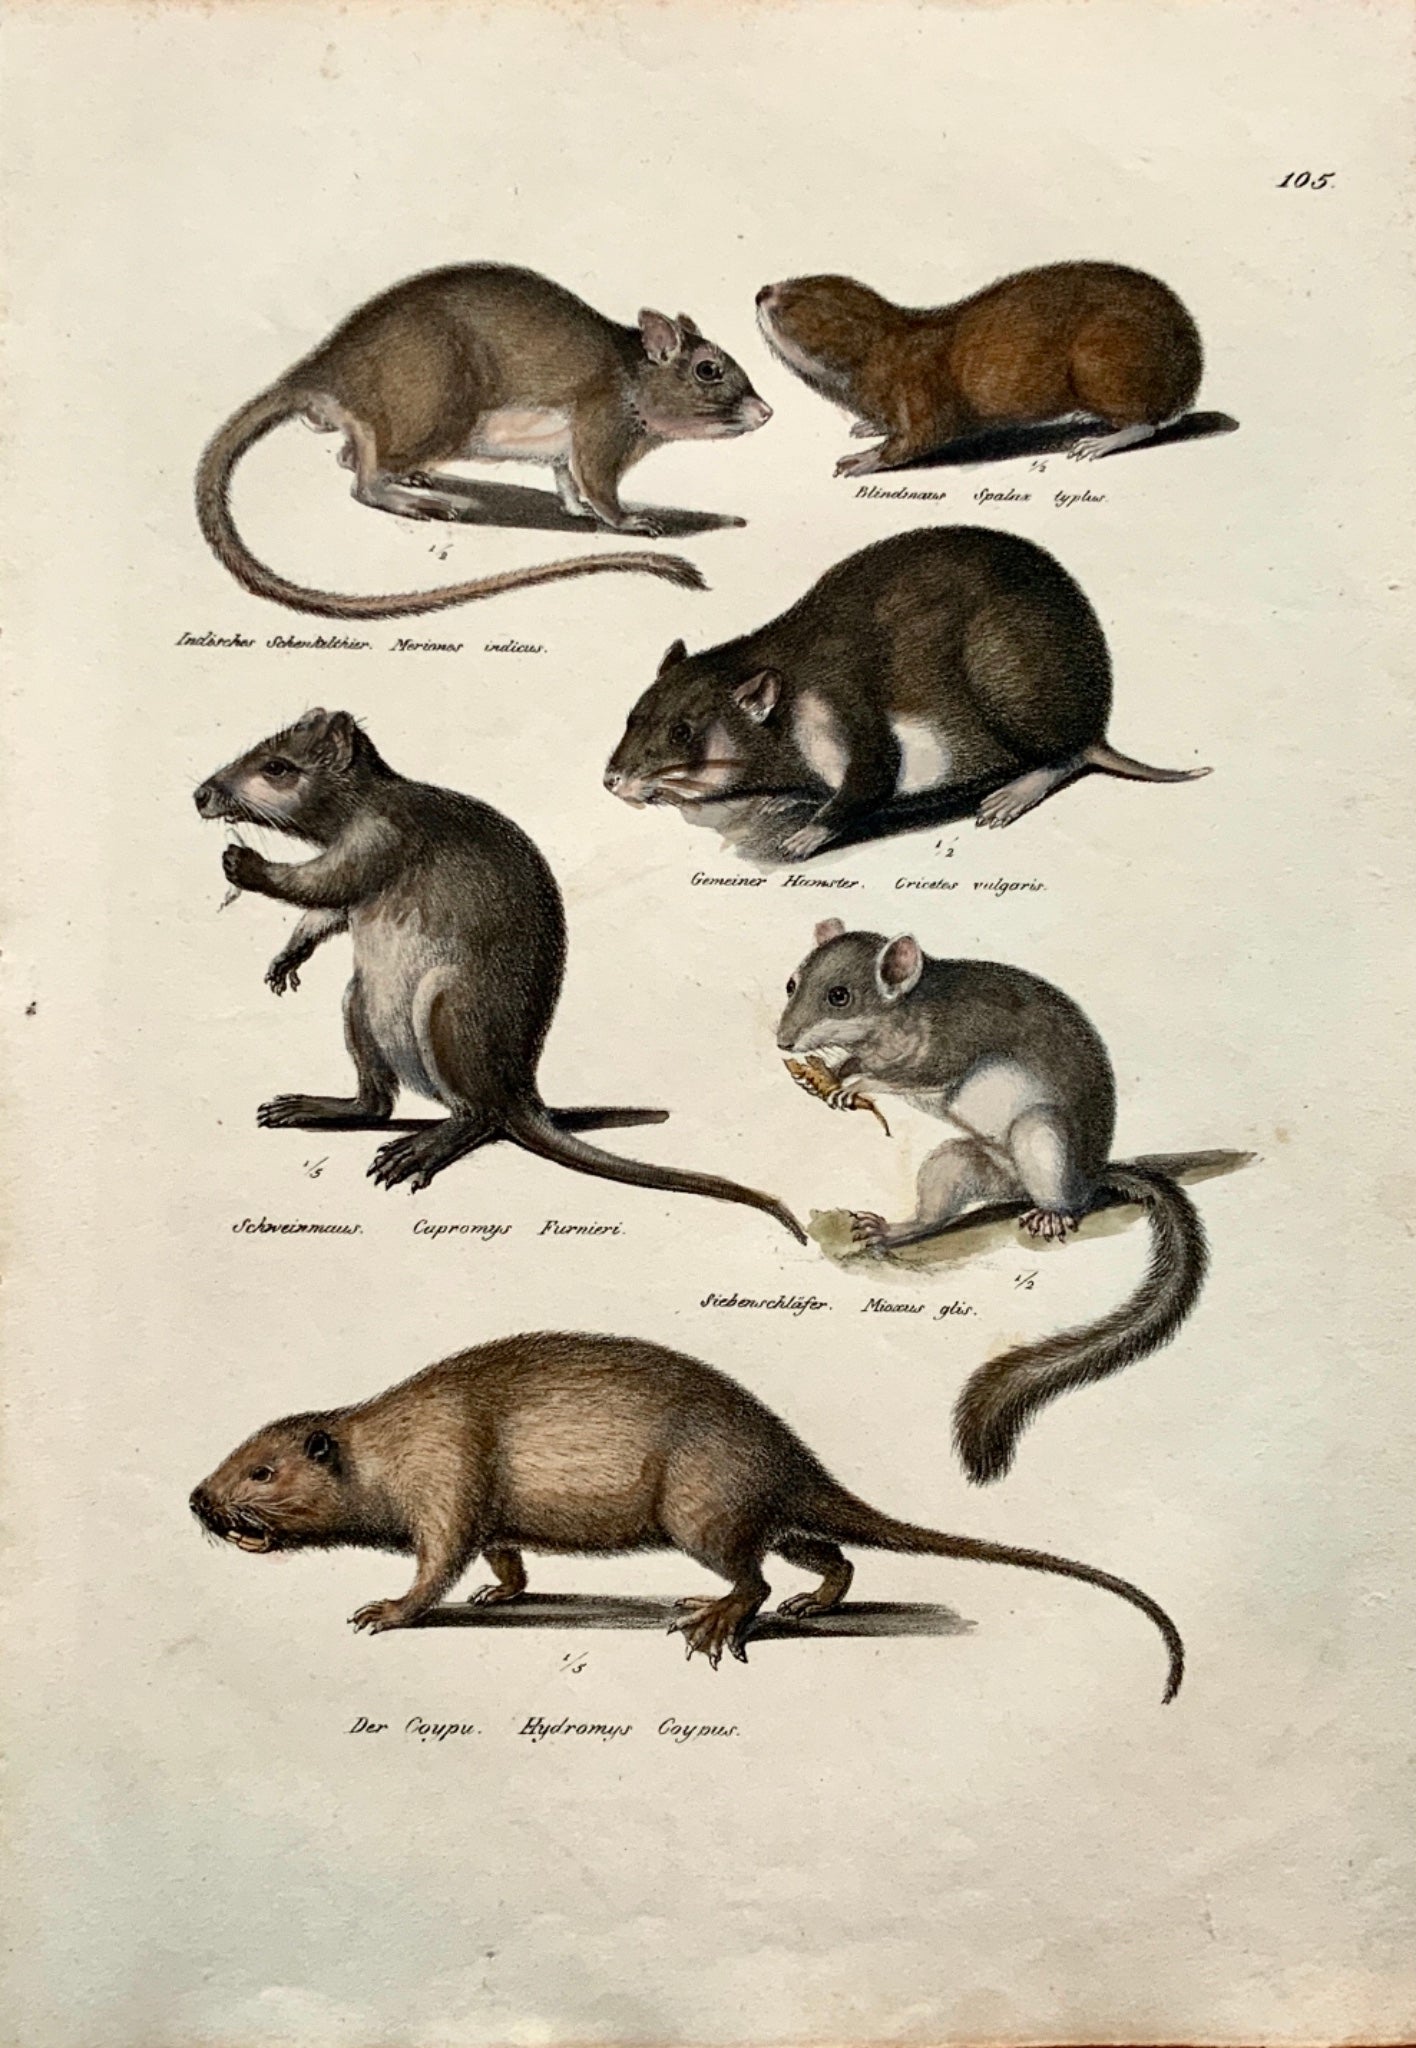 1824 Rodents: Hamster, Mice, Rats - K.J. Brodtmann hand colored FOLIO lithograph - Mammals